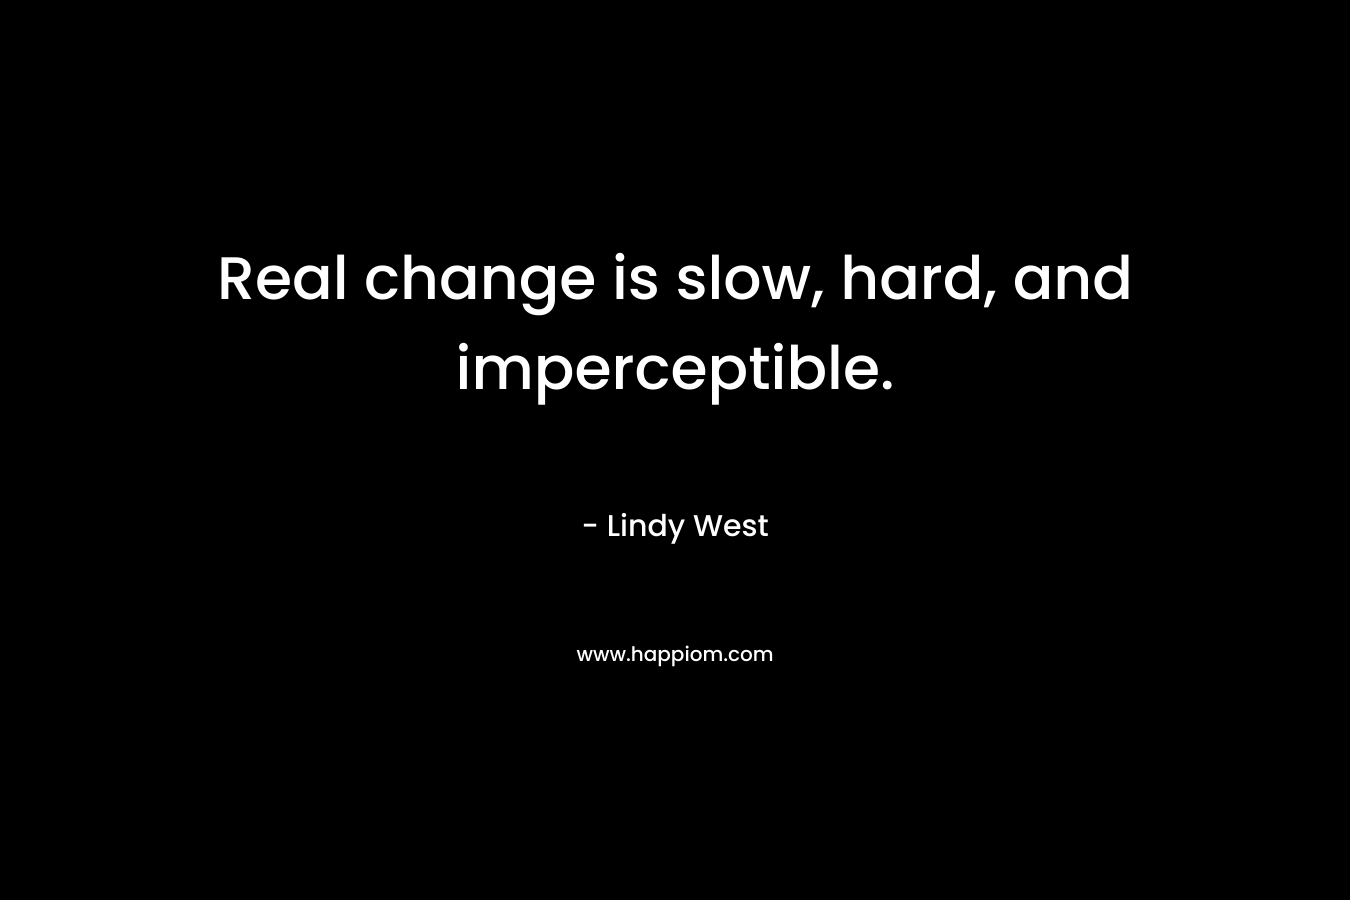 Real change is slow, hard, and imperceptible.